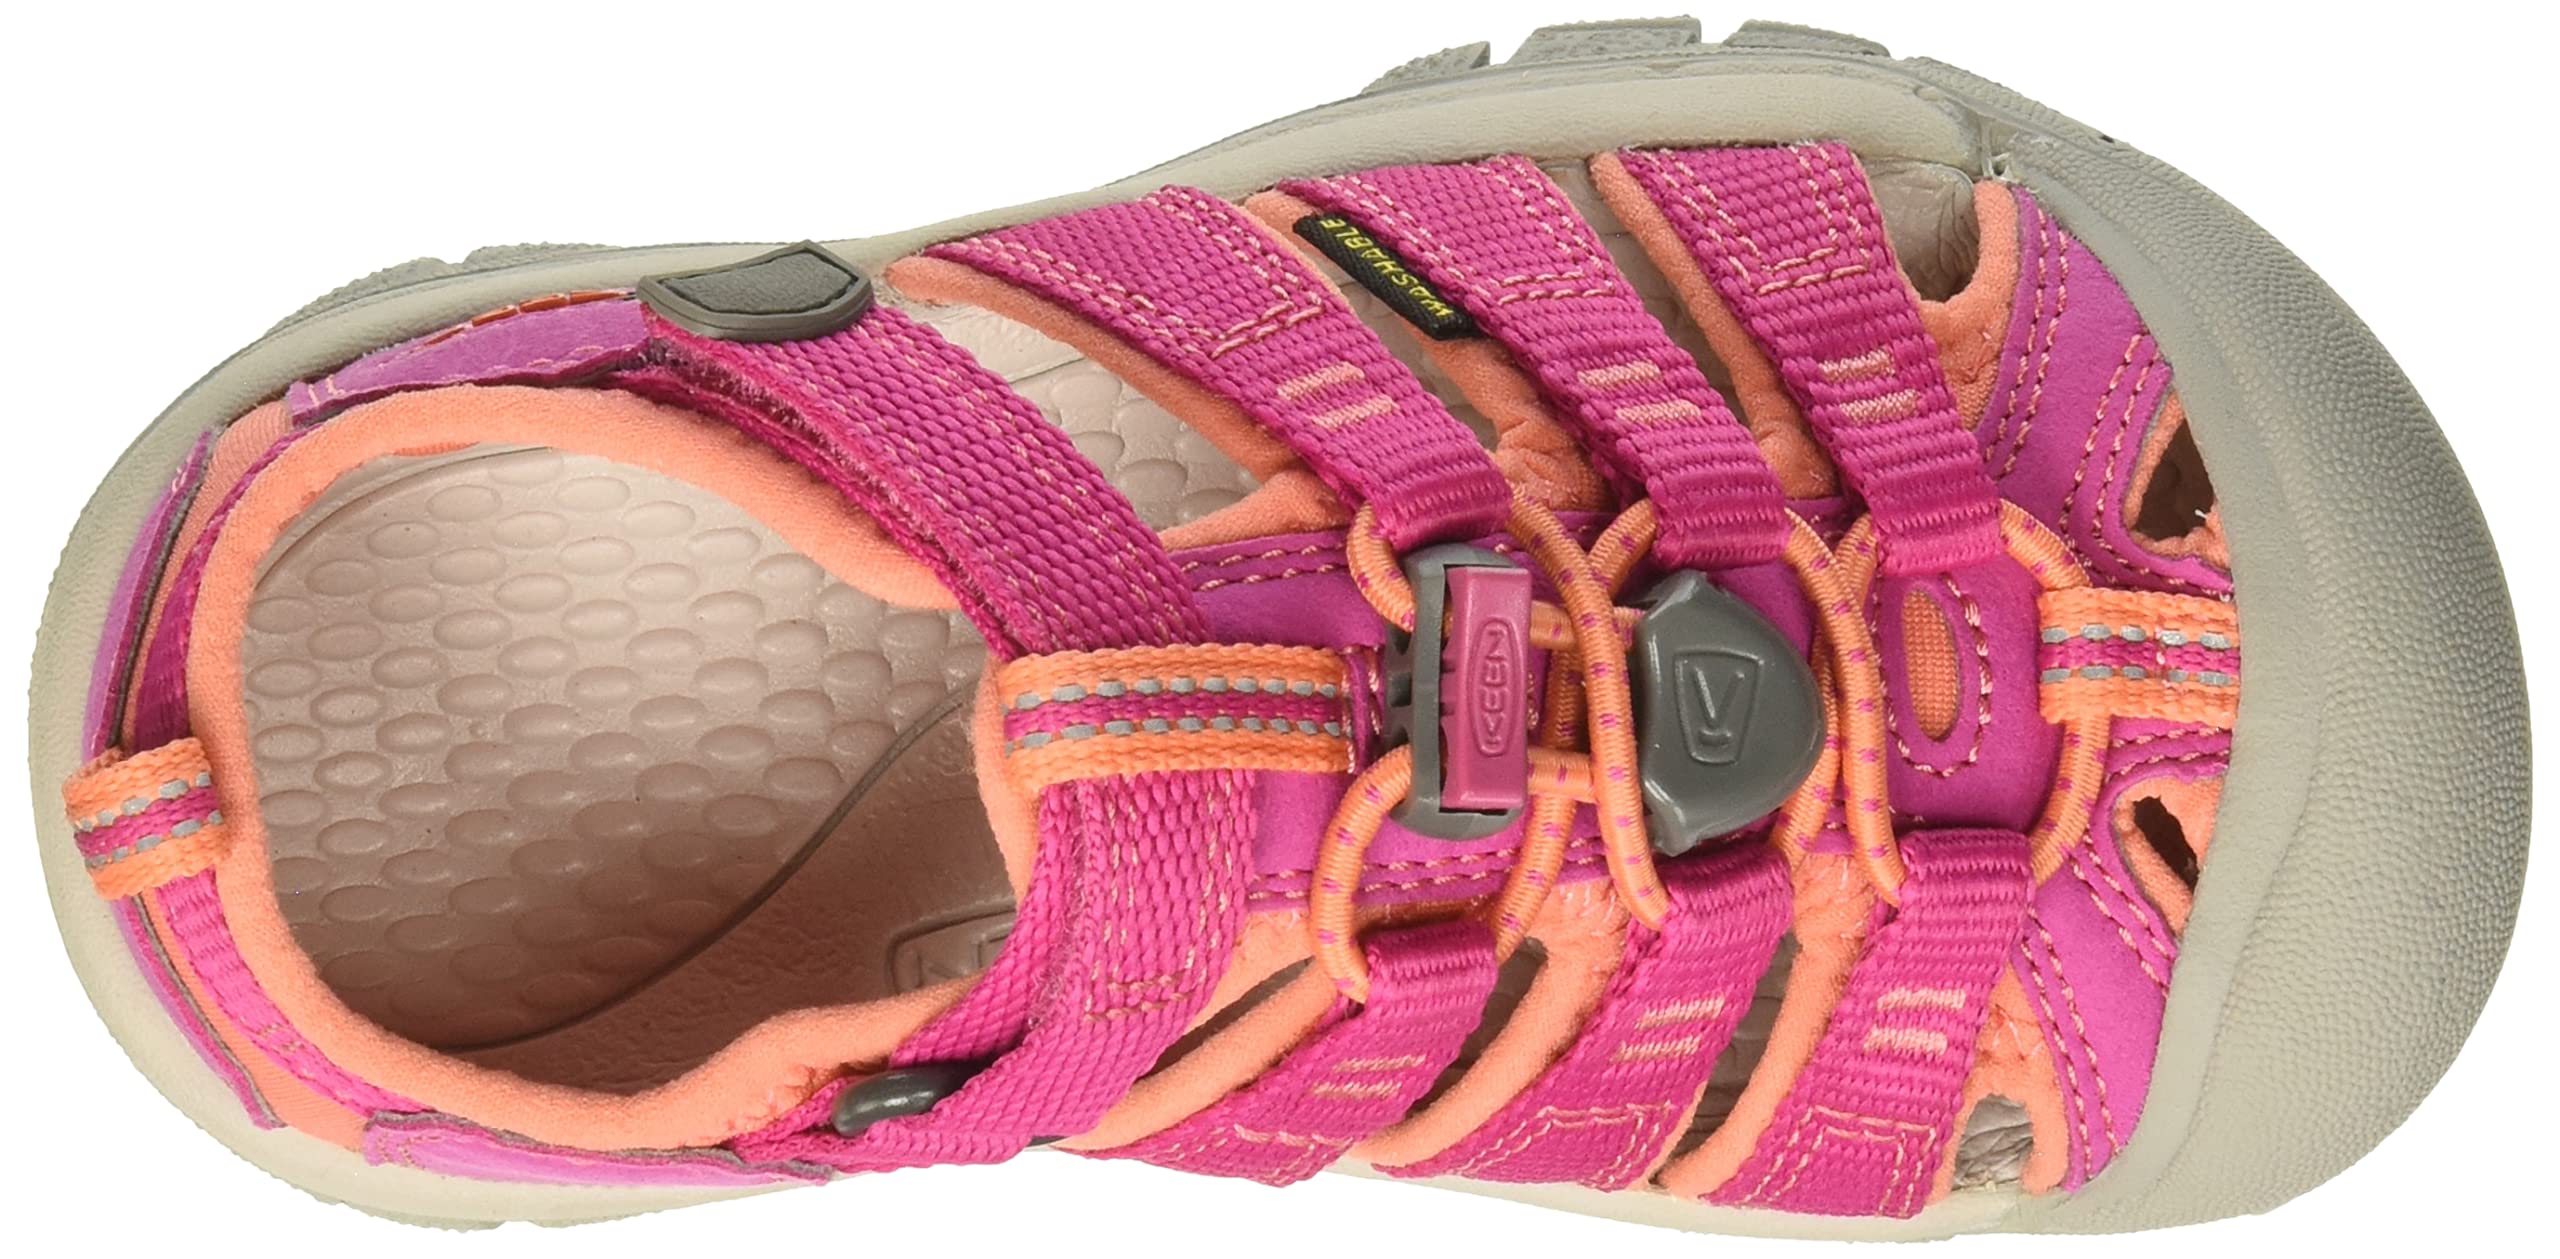 KEEN Little Kid (4-8 Years) Newport H2 Very Berry/fusion Coral Sandal - 12 Little Kid M